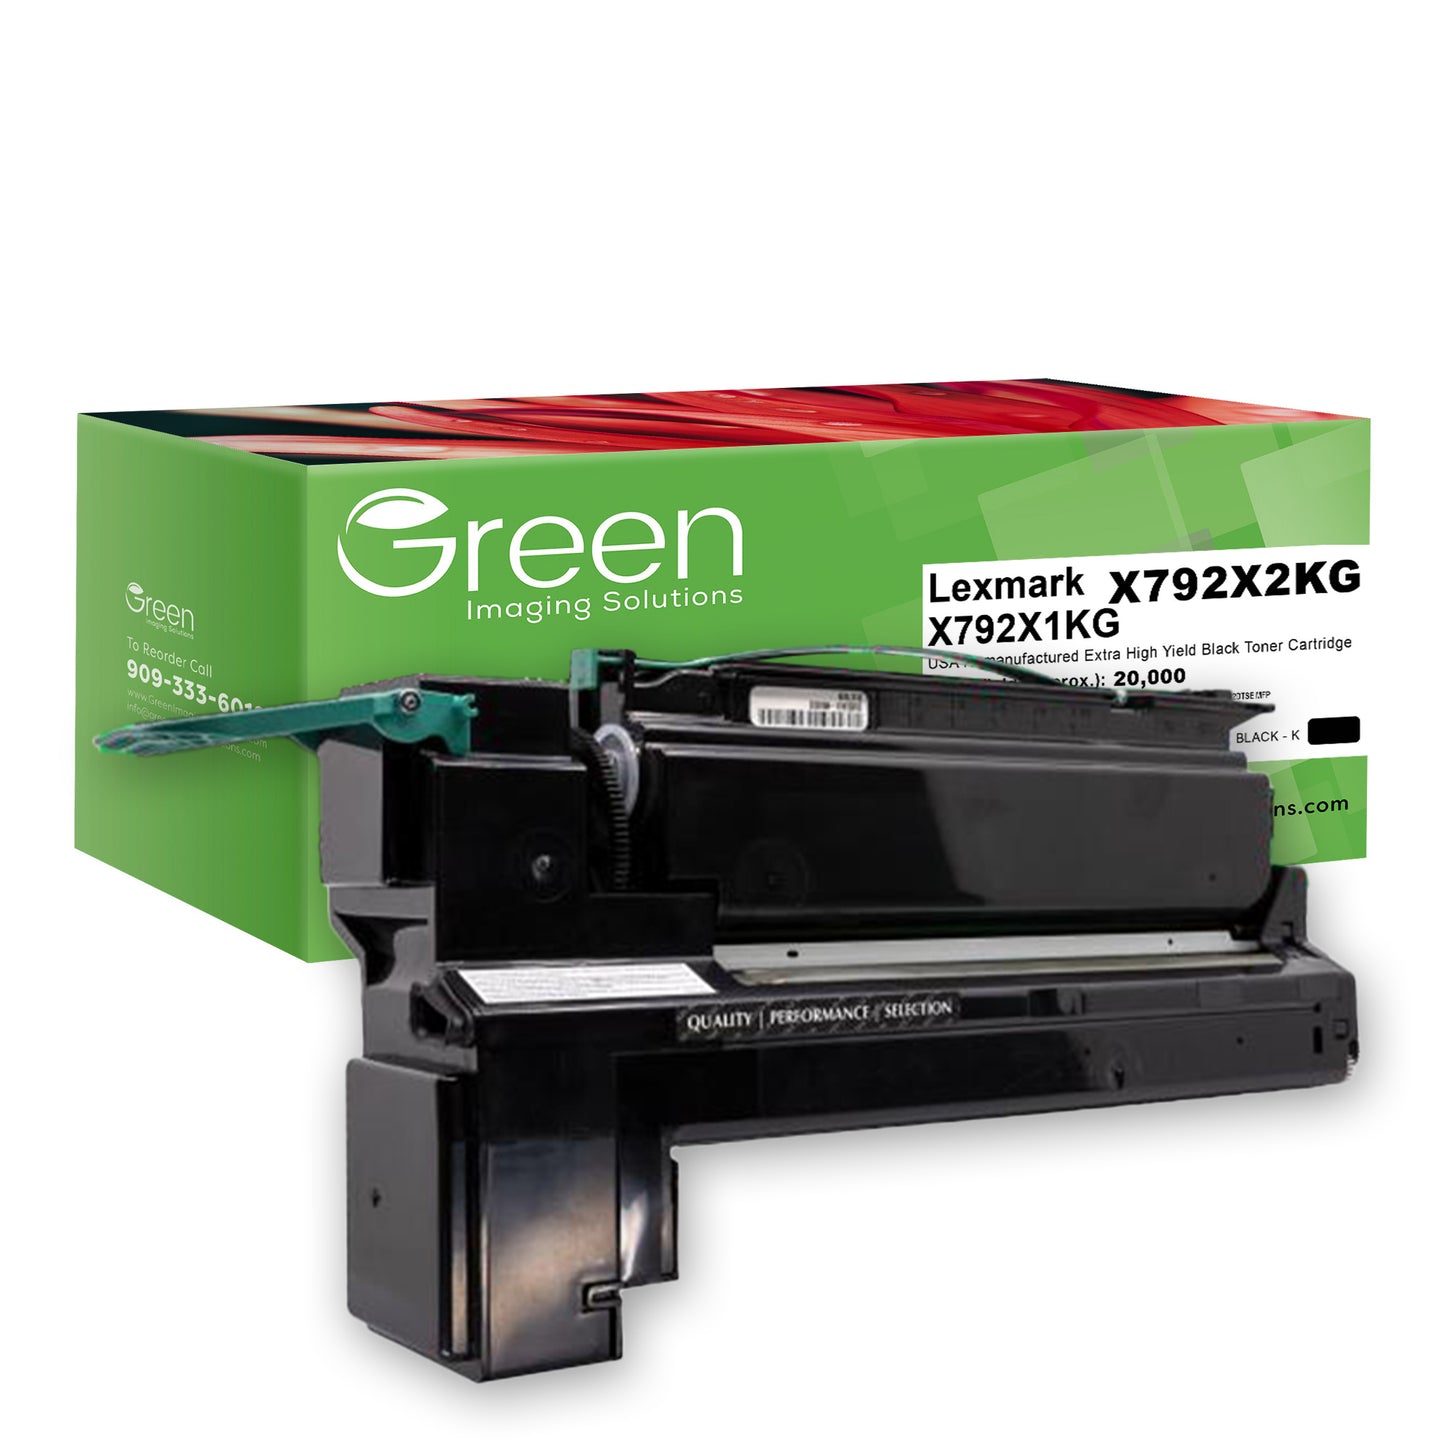 Green Imaging Solutions USA Remanufactured Extra High Yield Black Toner Cartridge for Lexmark X792